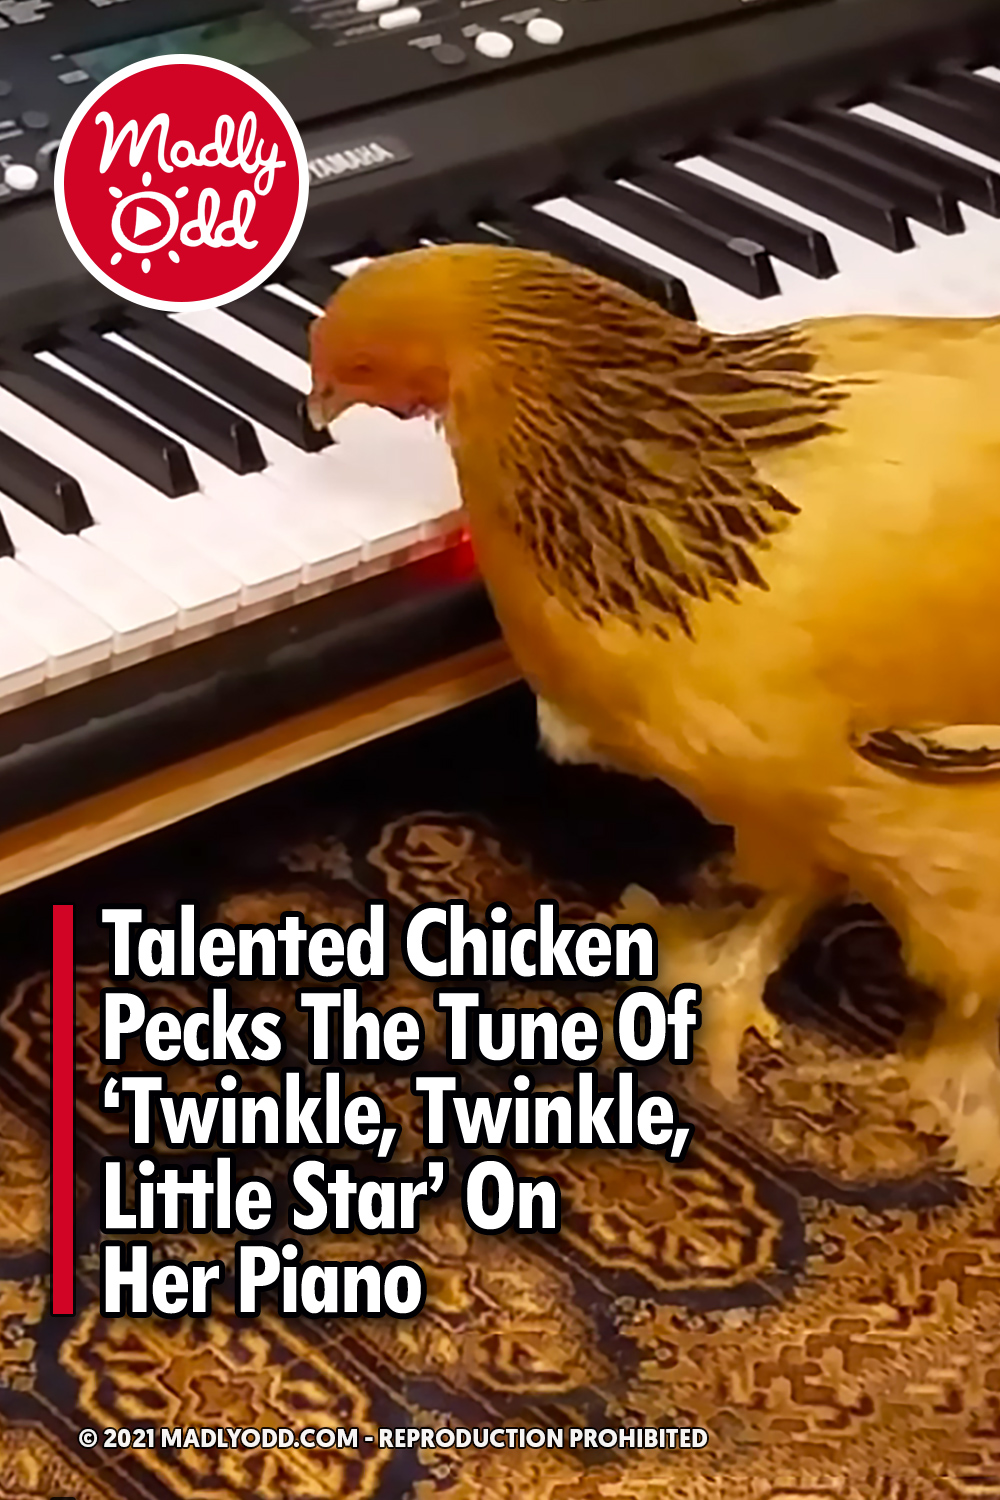 Talented Chicken Pecks The Tune Of ‘Twinkle, Twinkle, Little Star’ On Her Piano